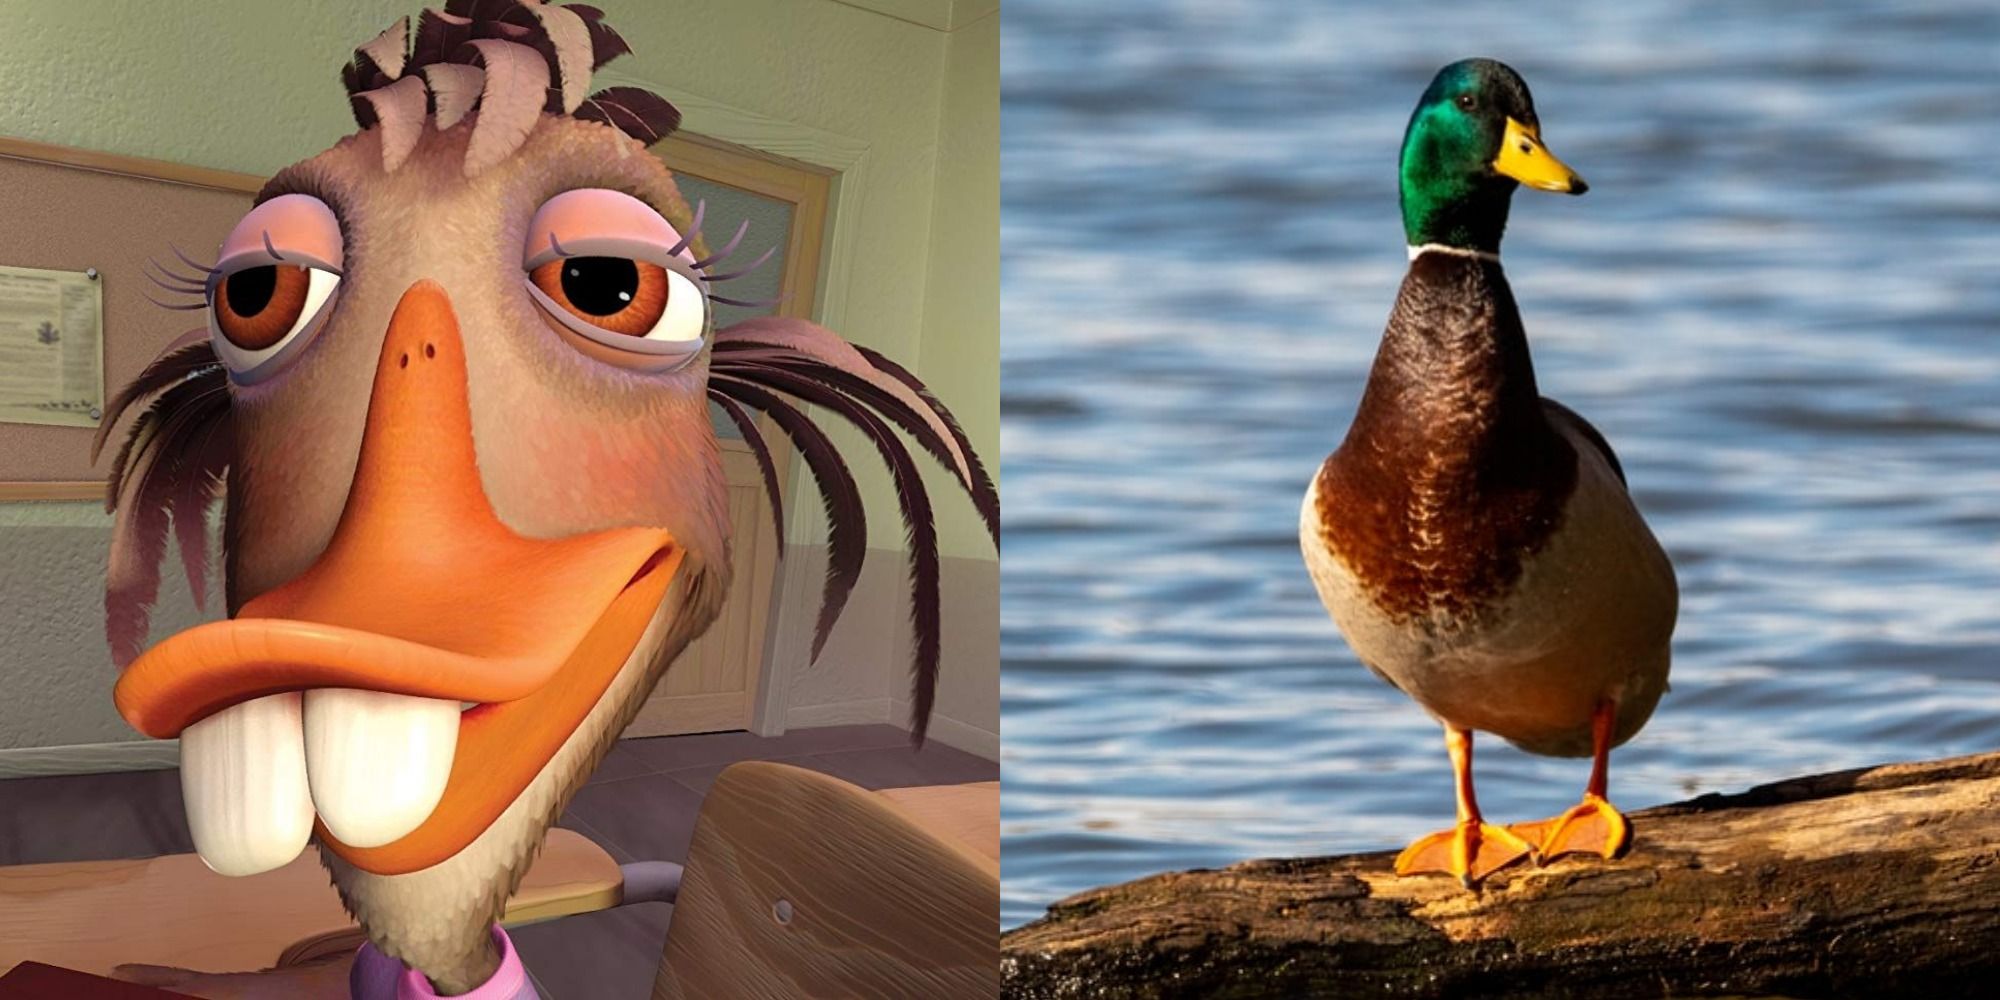 A side-by-side comparison of Abby Mallard from Chicken Little (2005) and an actual mallard